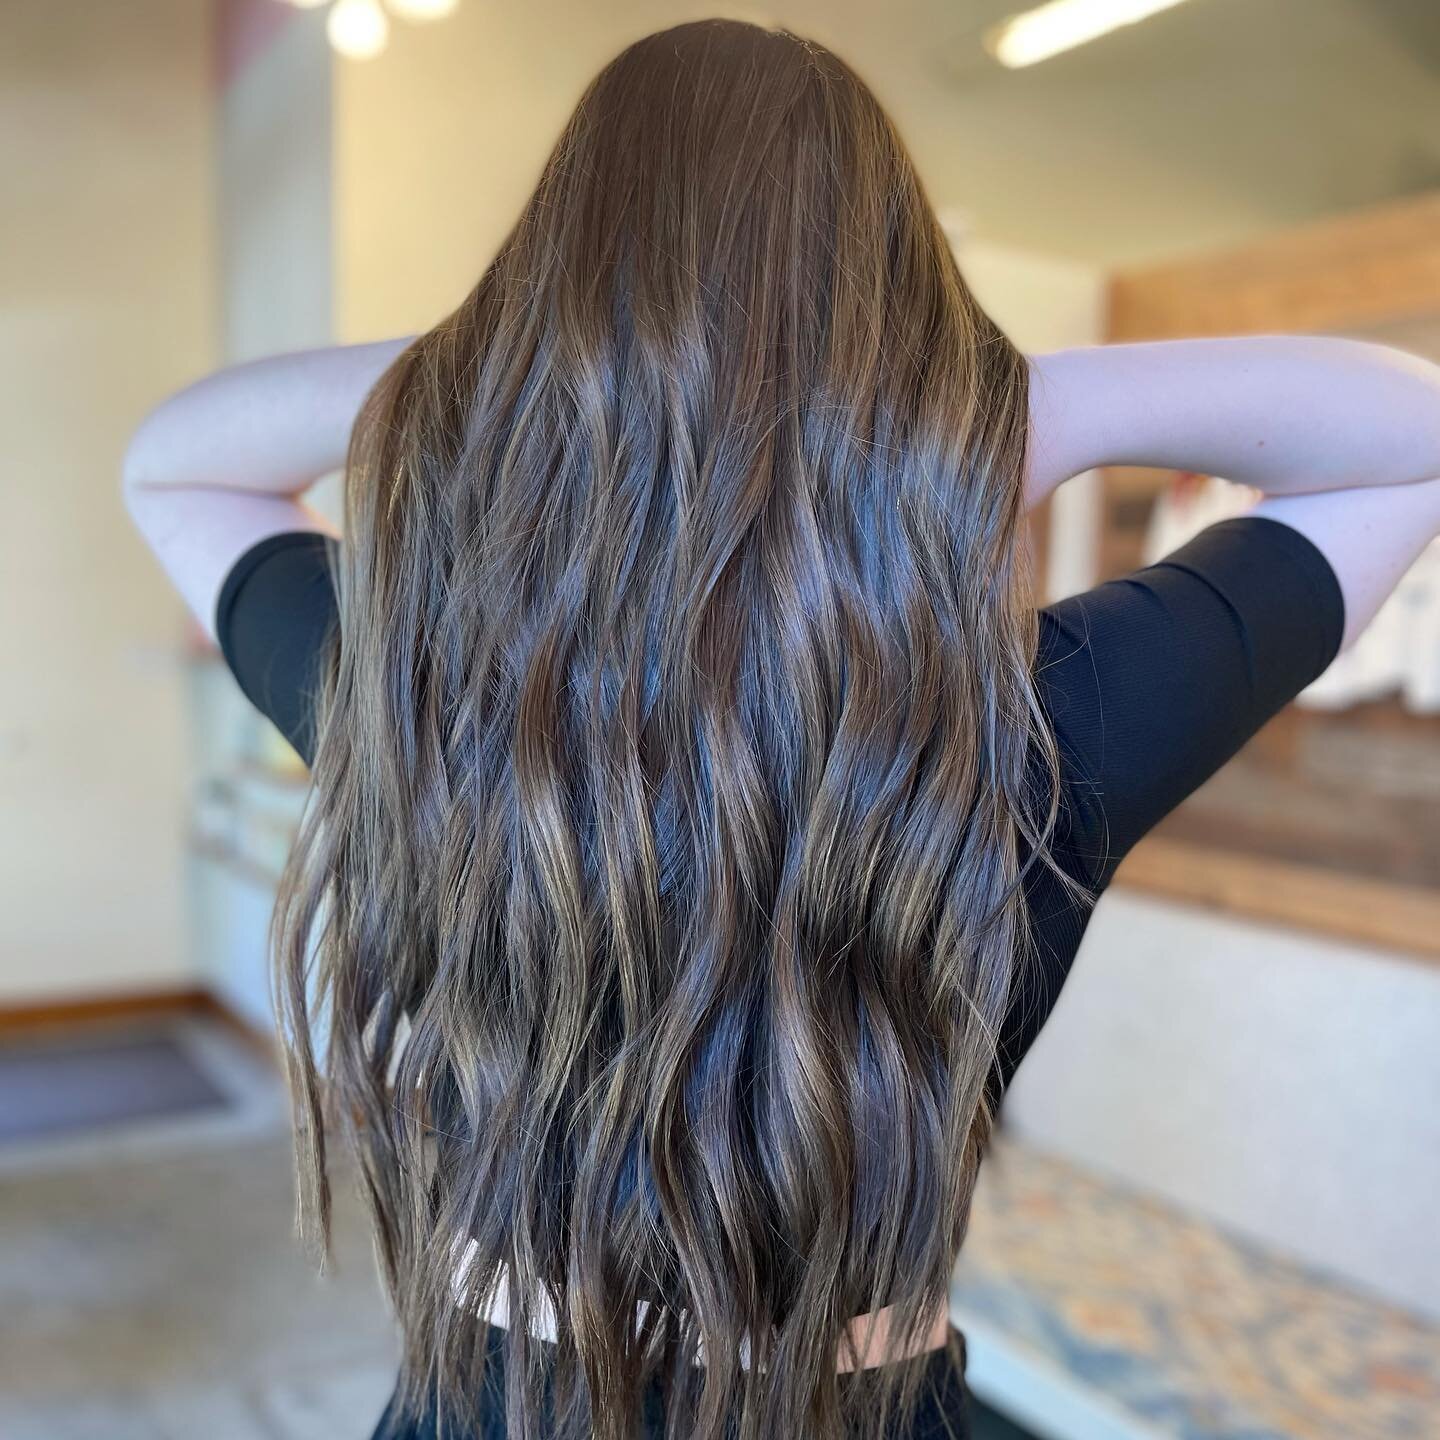 Falling in love with this light to dark transition 🍂
.
.
Text or DM me to book an appointment!
.
.
503.560.6363
.
.
#hairbyruthstrauss #coteriesalonpdx #portlandhairstylist #pdxhairstylist #behindthechair #balayage #balayagist #bestofbalayage